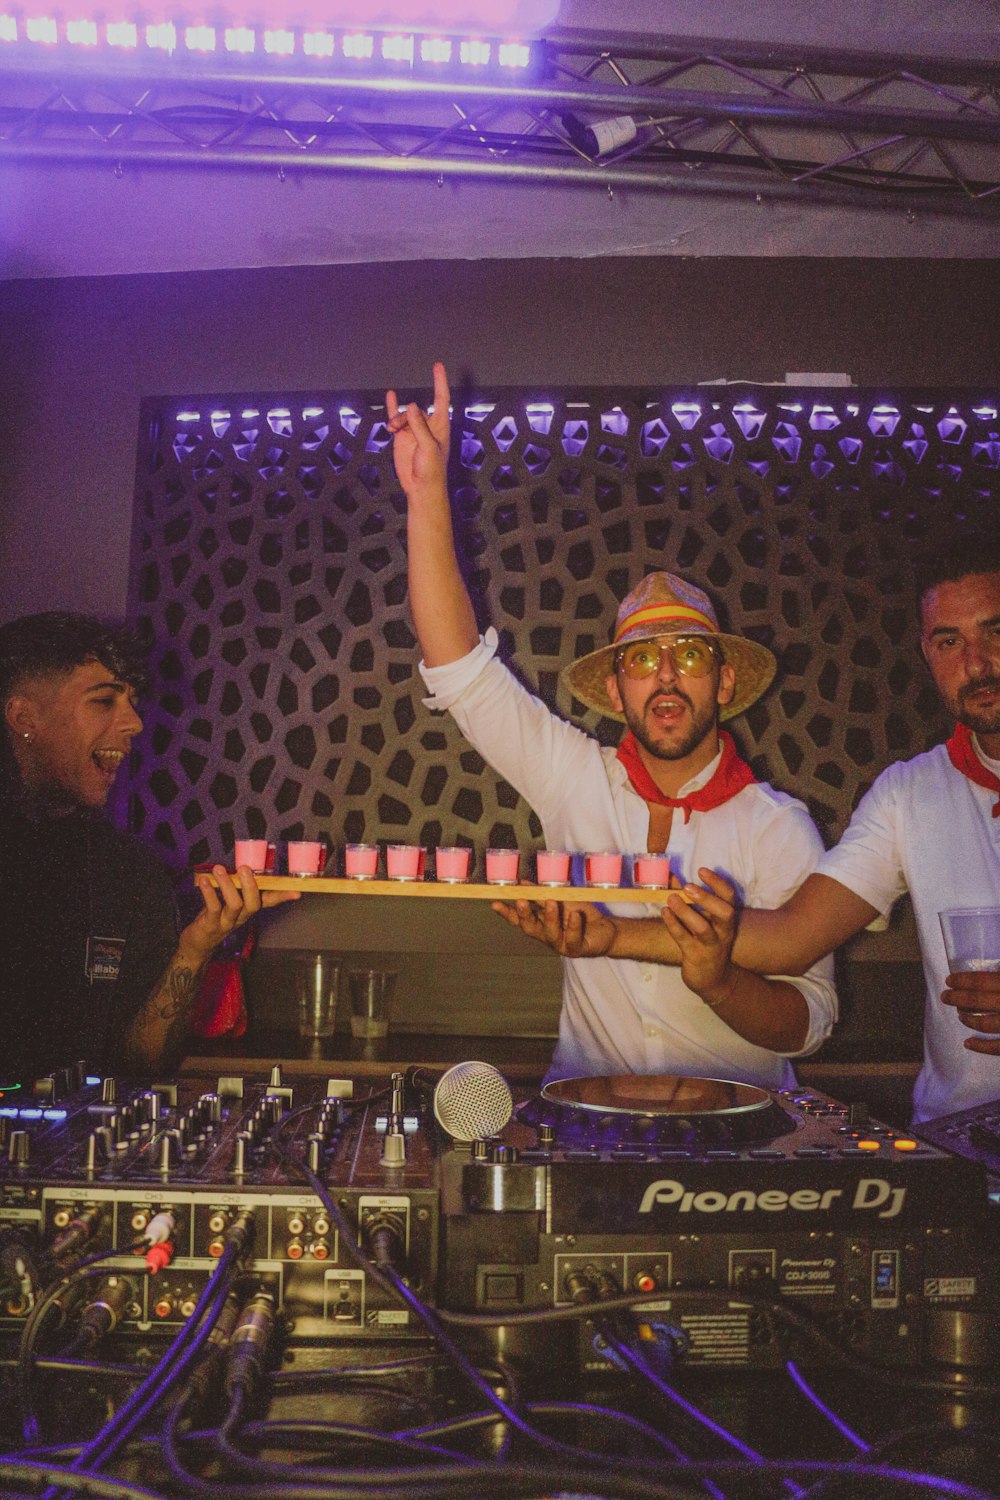 a dj mixing at a party with two men